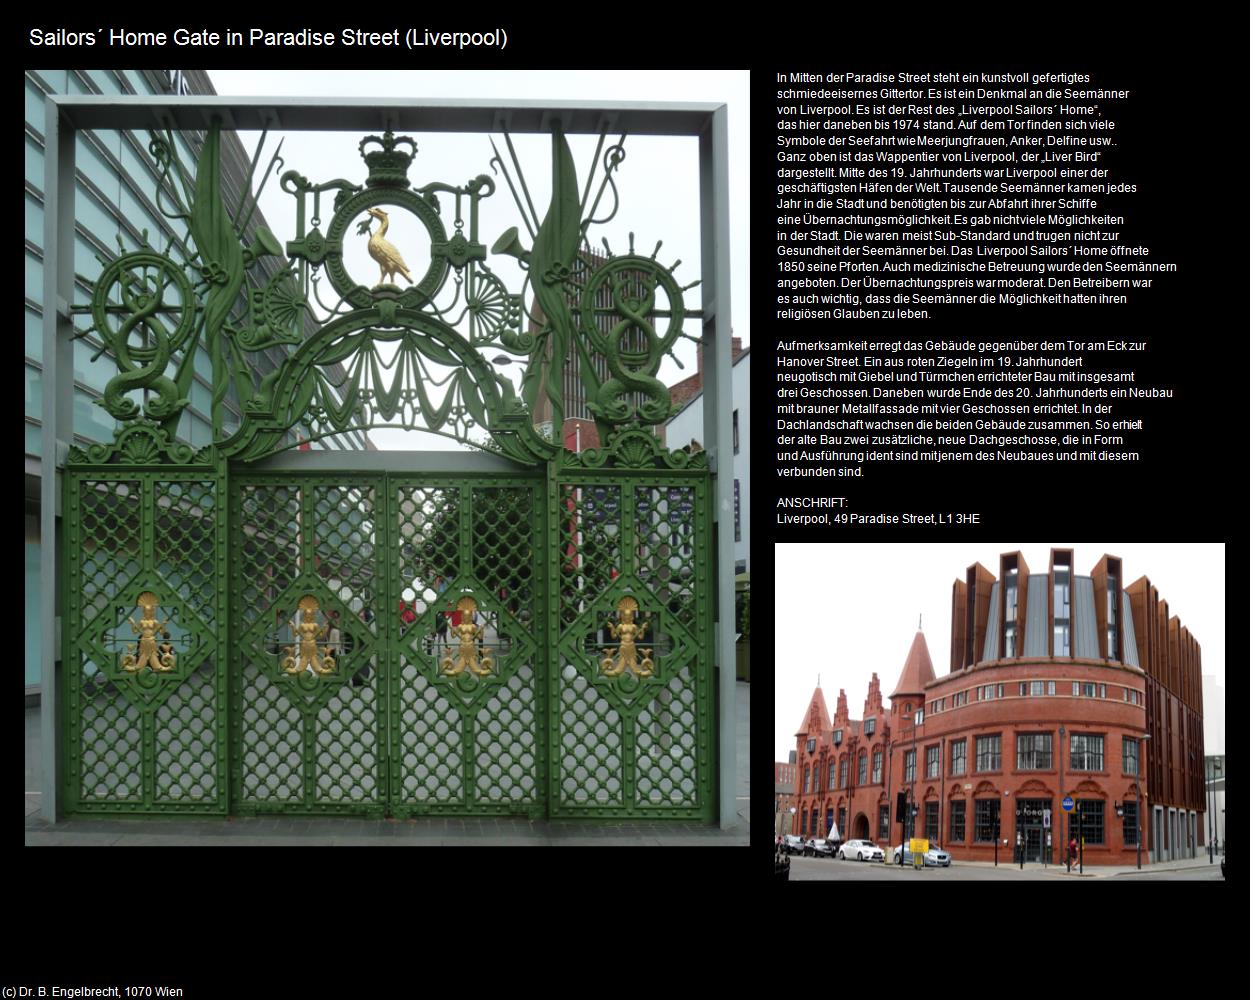 Sailors‘Home Gate in Paradise Street           (Liverpool, England) in Kulturatlas-ENGLAND und WALES